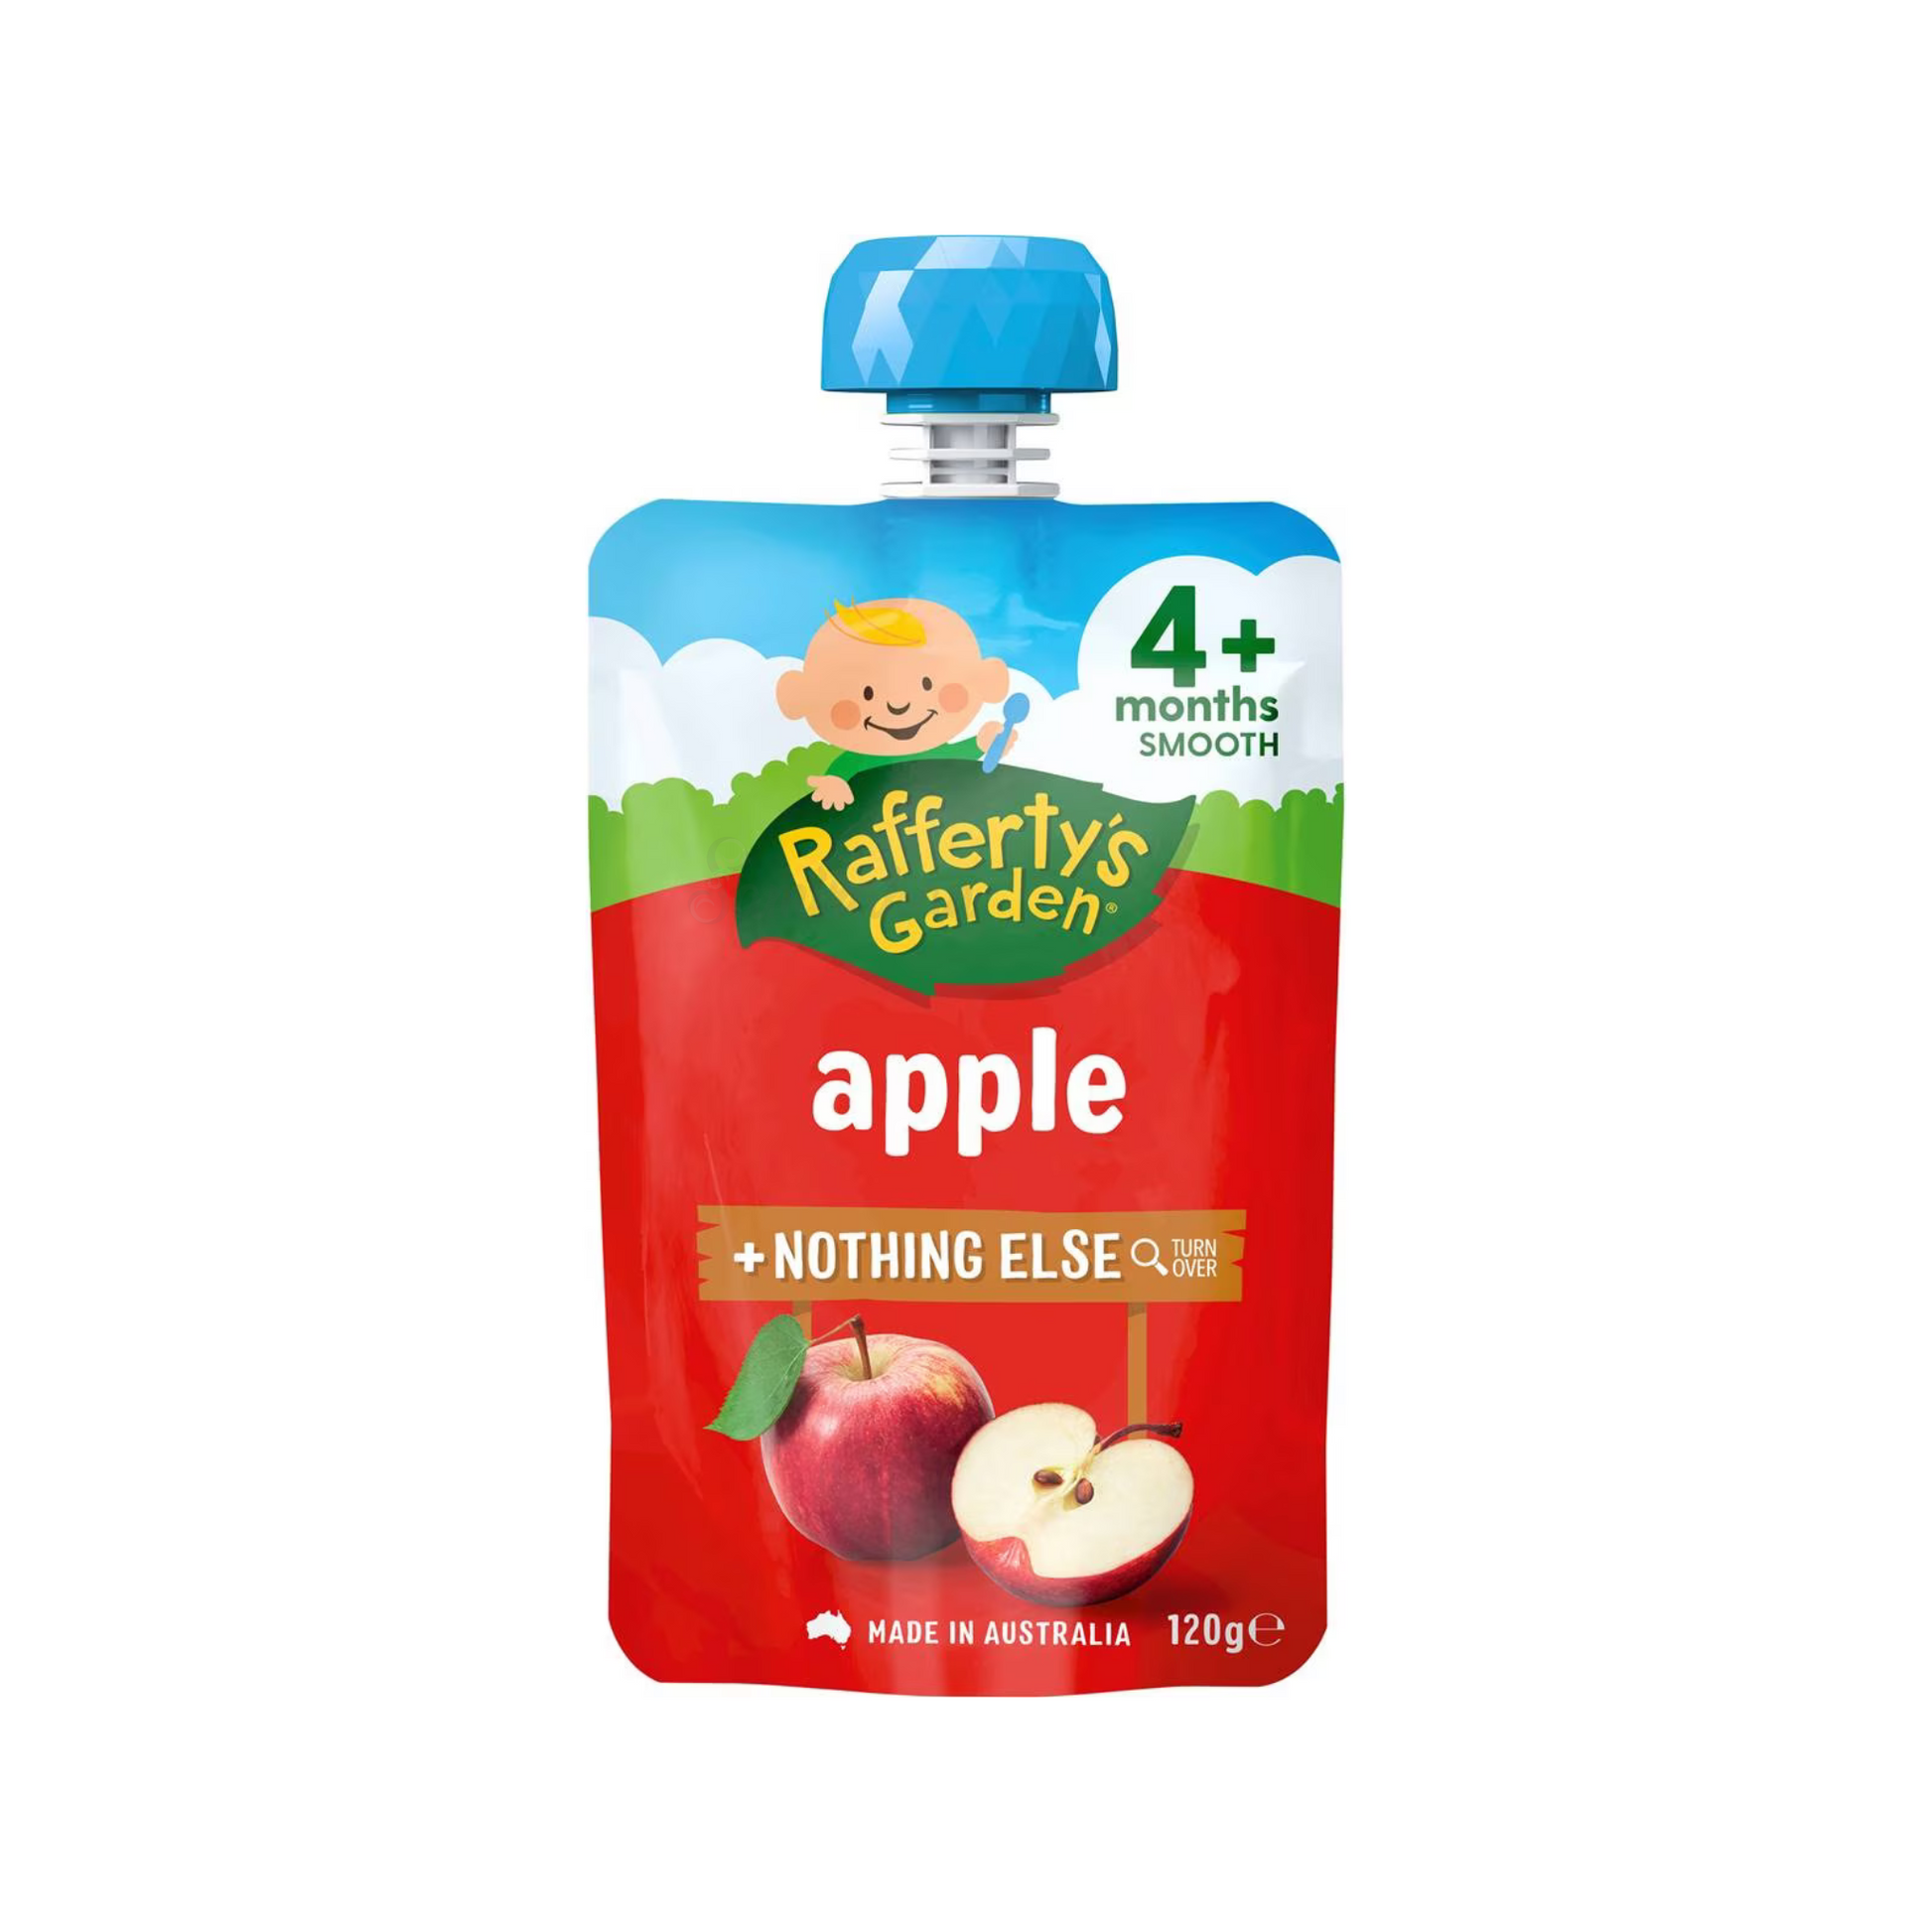 Rafferty's Garden Apple Puree Baby Food Pouch 4+ Months is made from premium Australian fruit. No artificial colour or flavor. Halal certified. Best imported foreign Australian Aussie genuine authentic premium quality real child snack healthy price in Dhaka Chittagong Sylhet Bangladesh.